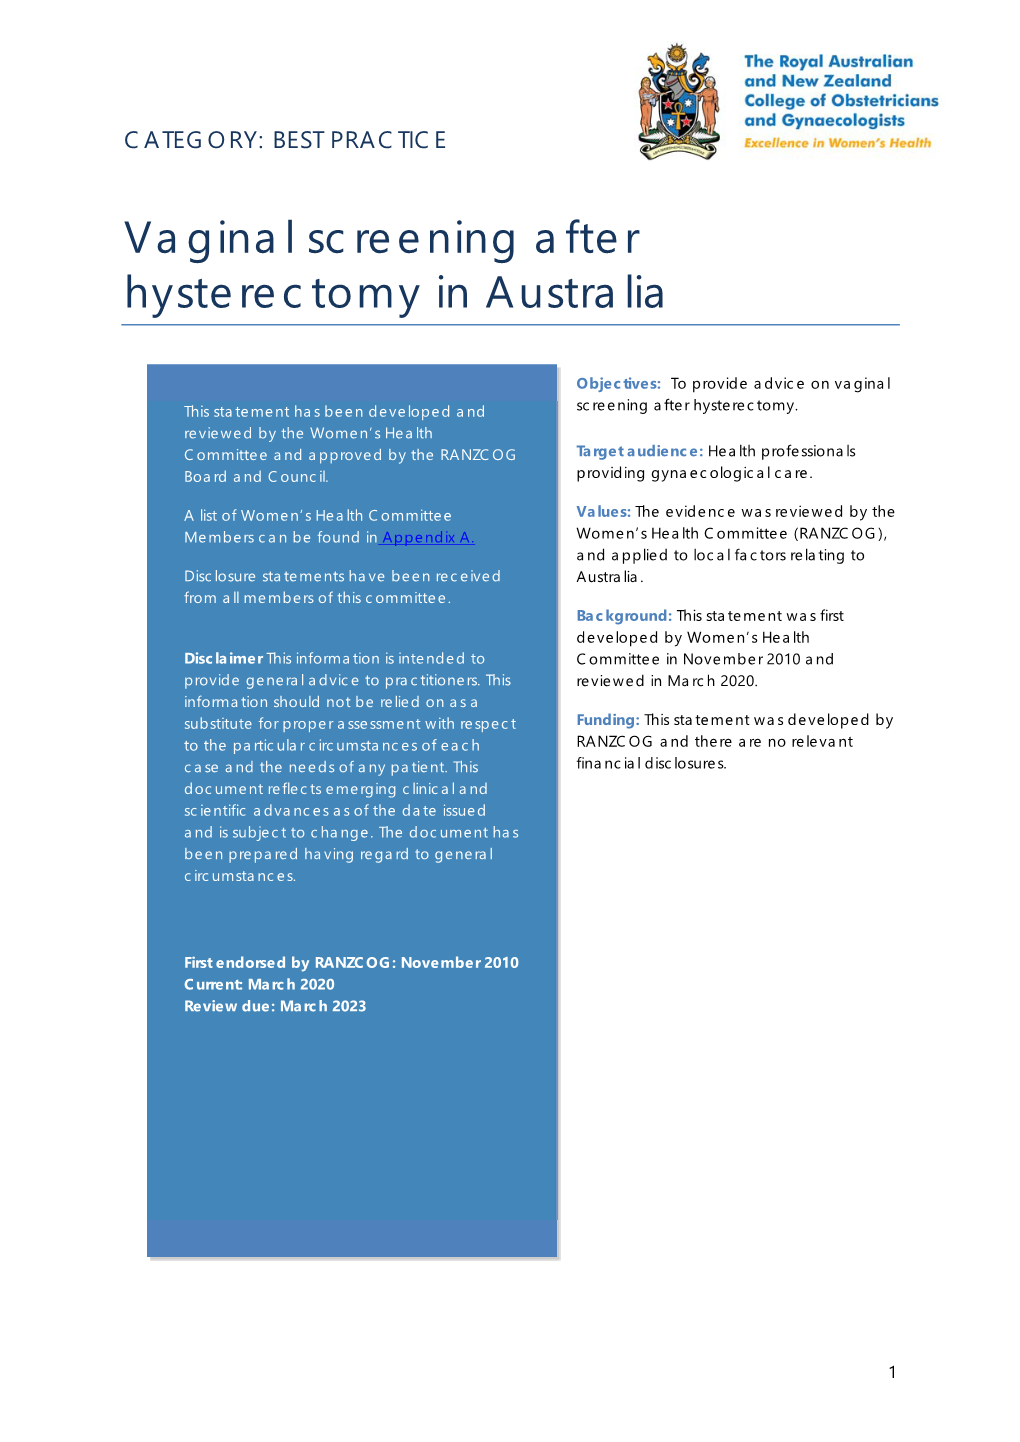 Vaginal Screening After Hysterectomy in Australia